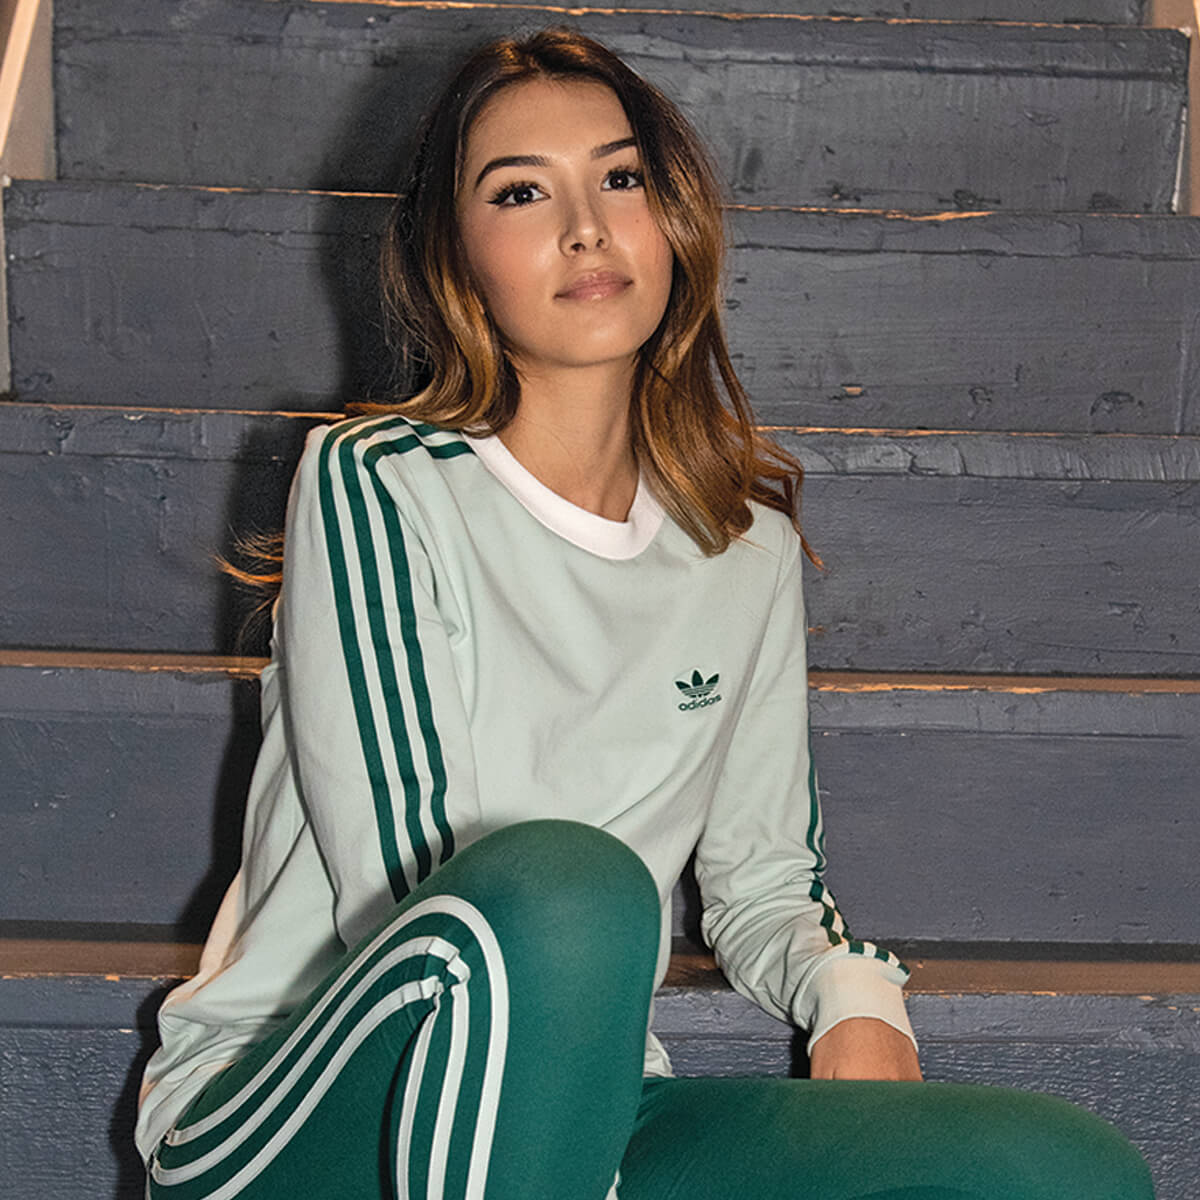 ADIDAS TRACK SUITS AND SWEATPANTS FROM ADIDAS - SHOP WOMEN'S ADIDAS